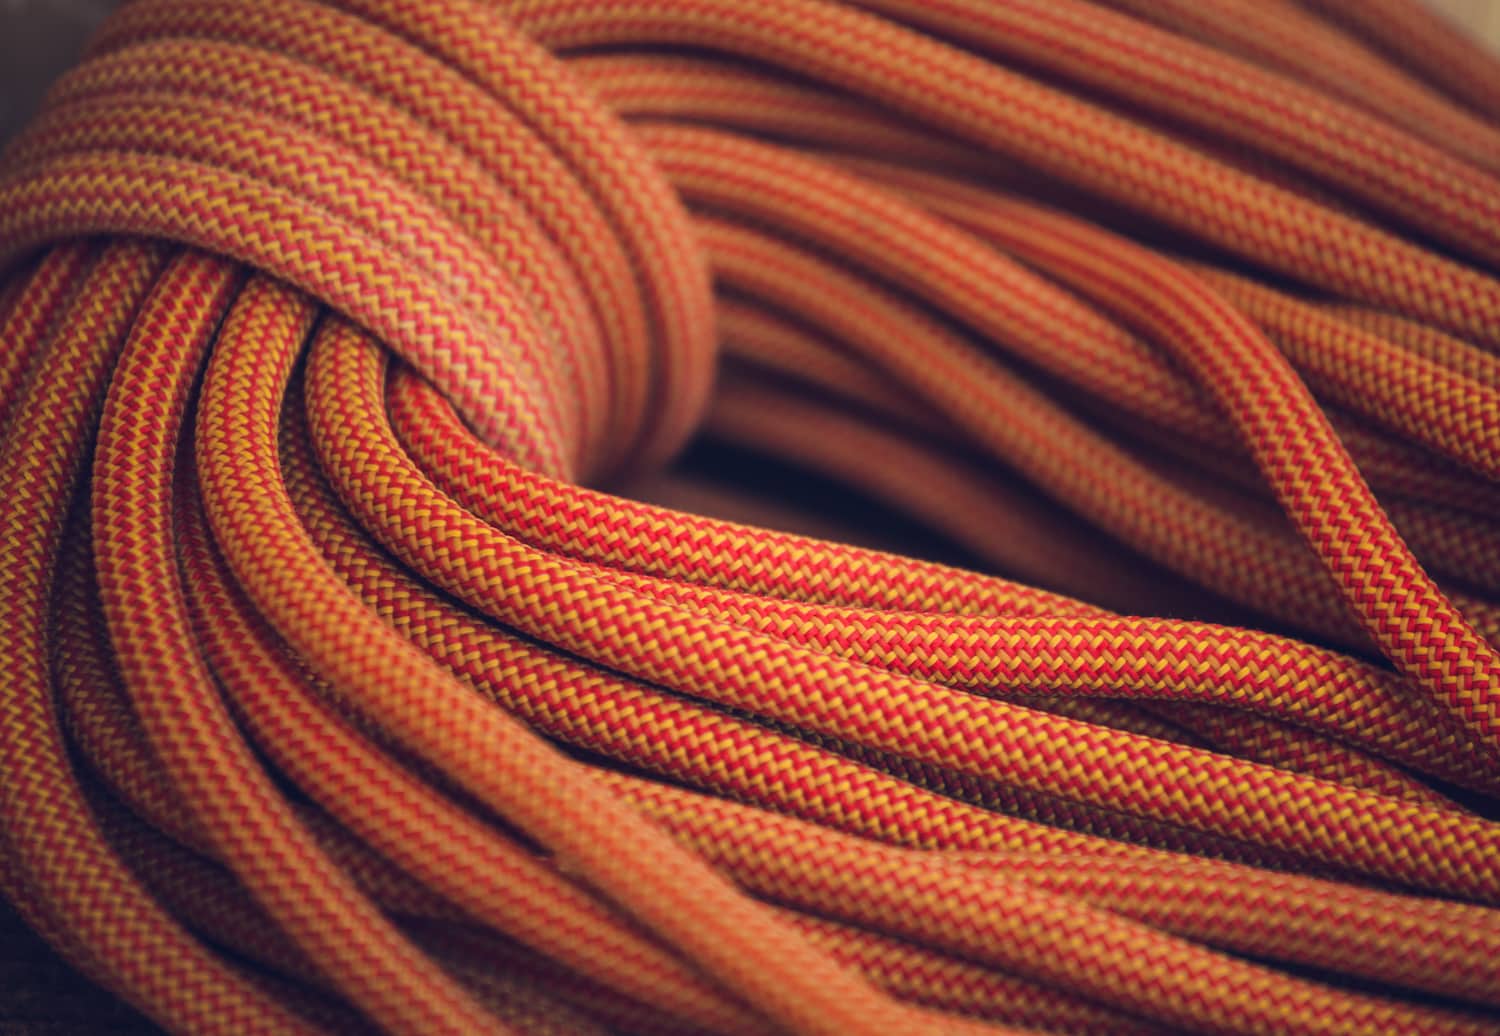 when to retire climbing rope